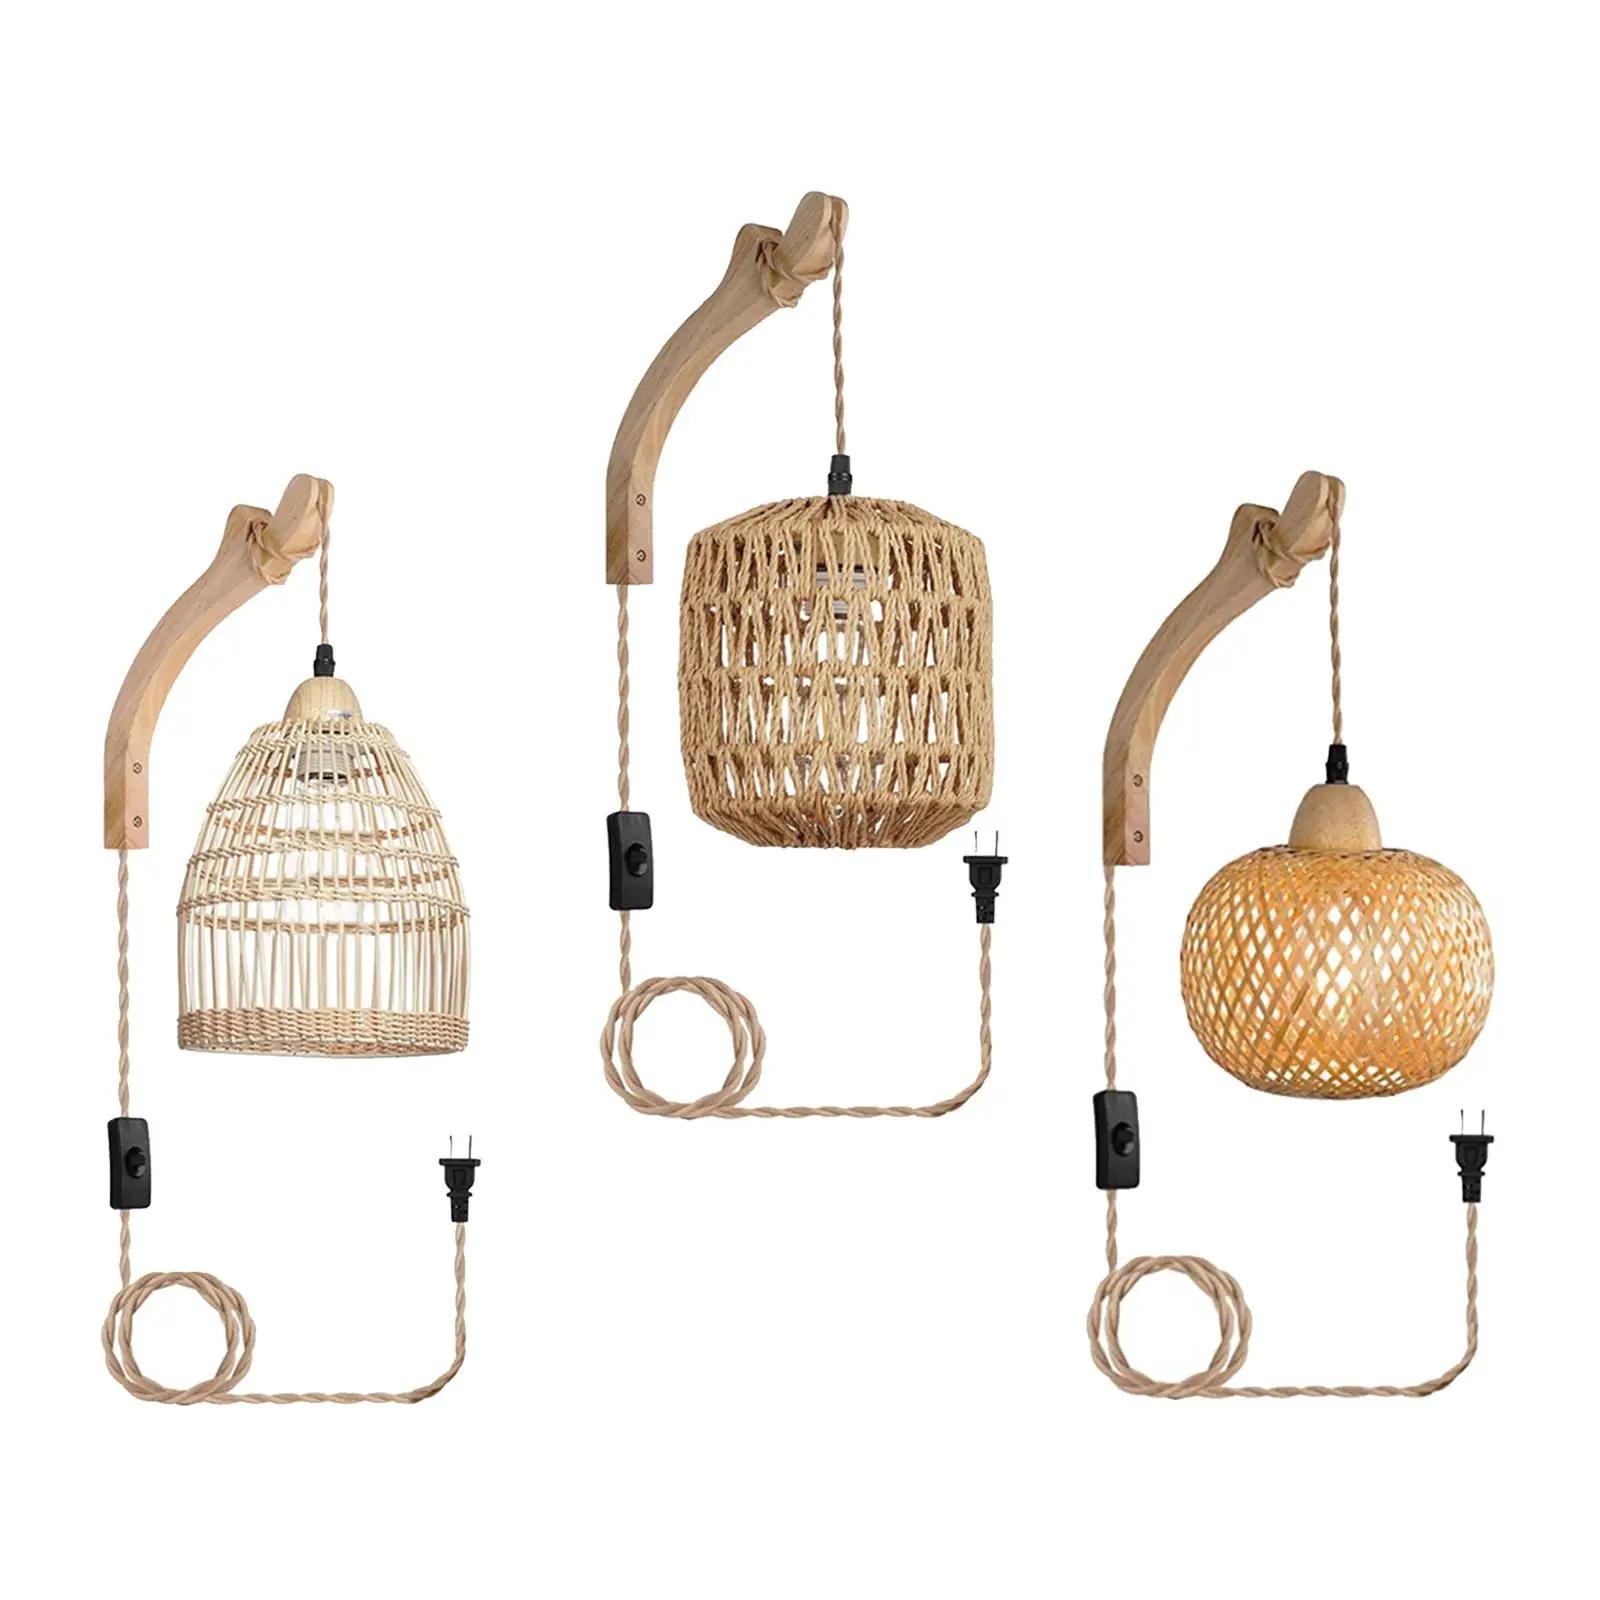 Woven Hanging Light Fixture 9.84ft Adjustable Cord Rustic Wall Sconces Plug in Pendant Lights Plug in Ceiling Light for Hall